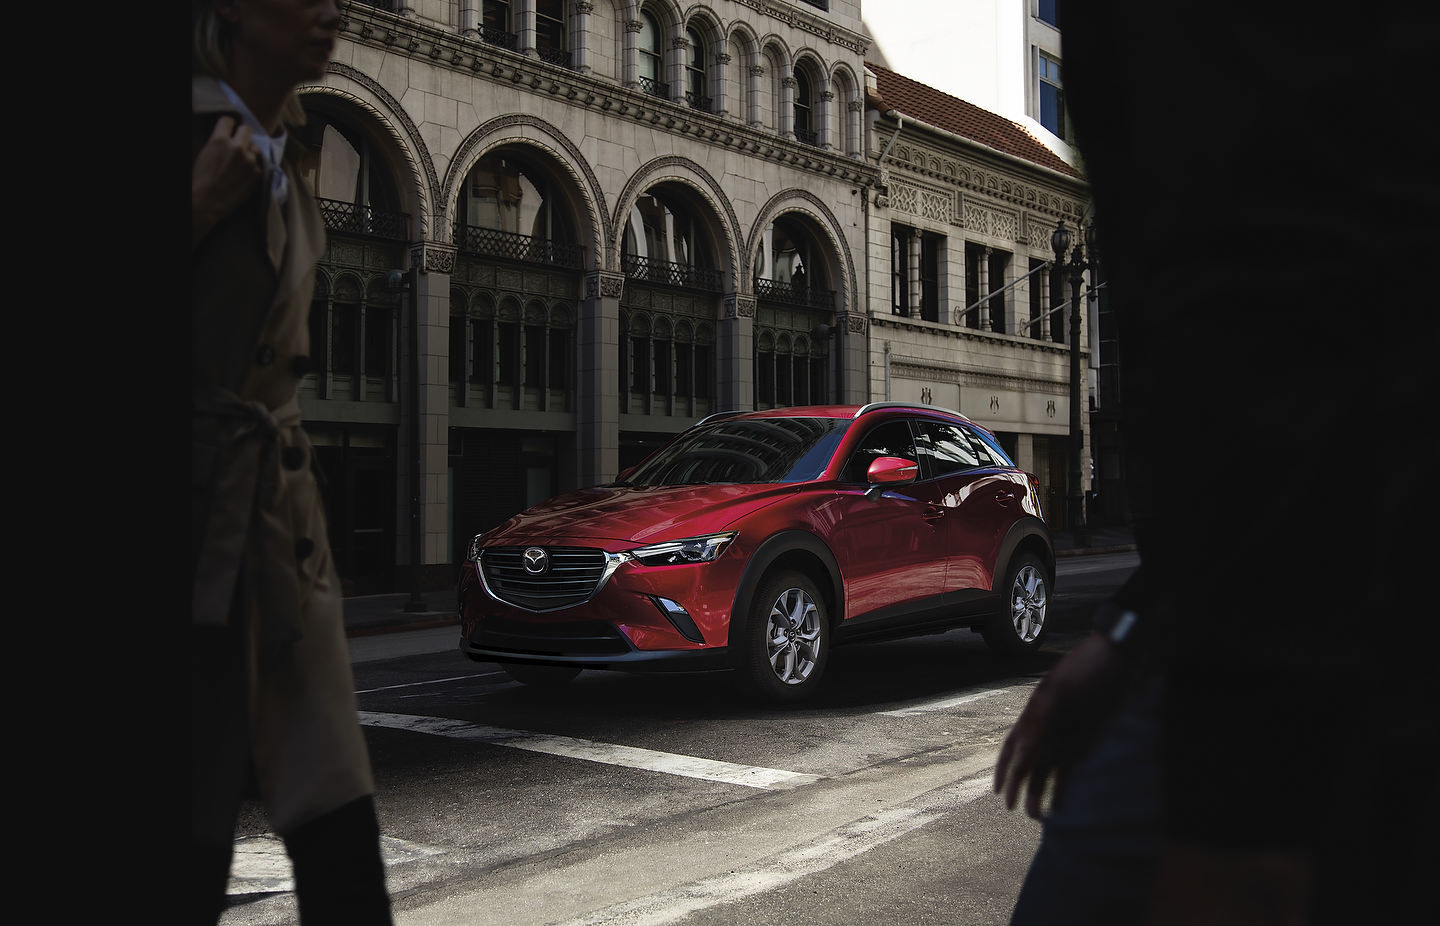 Three Reasons the Mazda CX-3 is the Best Pre-Owned Subcompact SUV